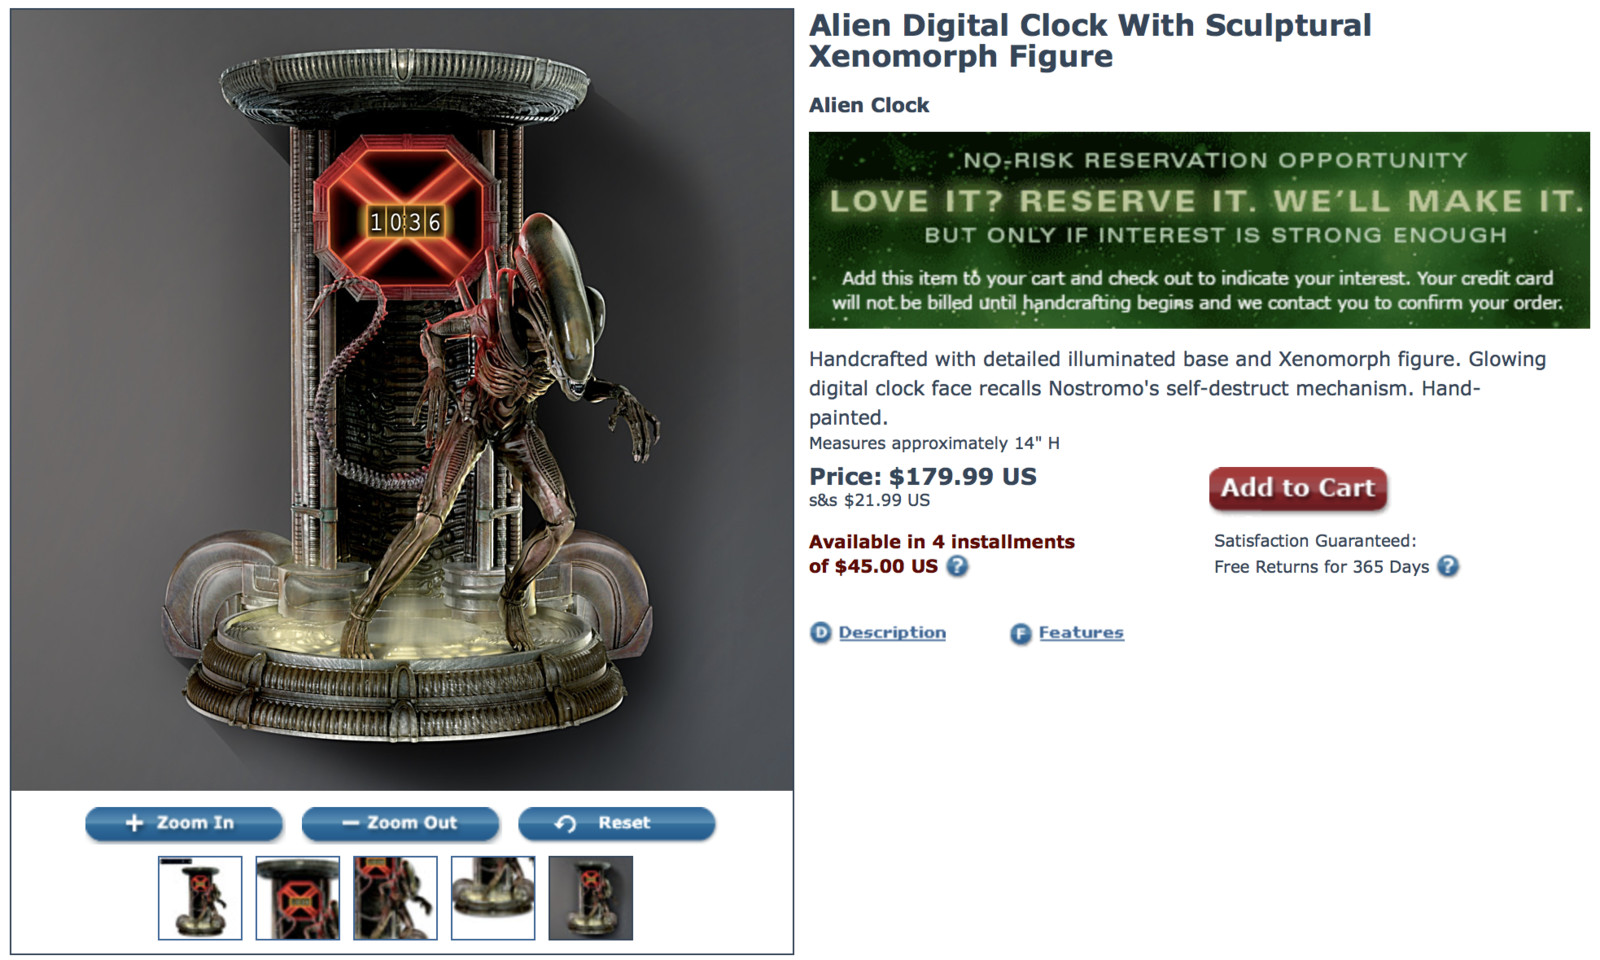 Product Page for Final Clock

http://www.bradfordexchange.com/products/126085001_alien-digital-clock-with-xenomorph-figure.html